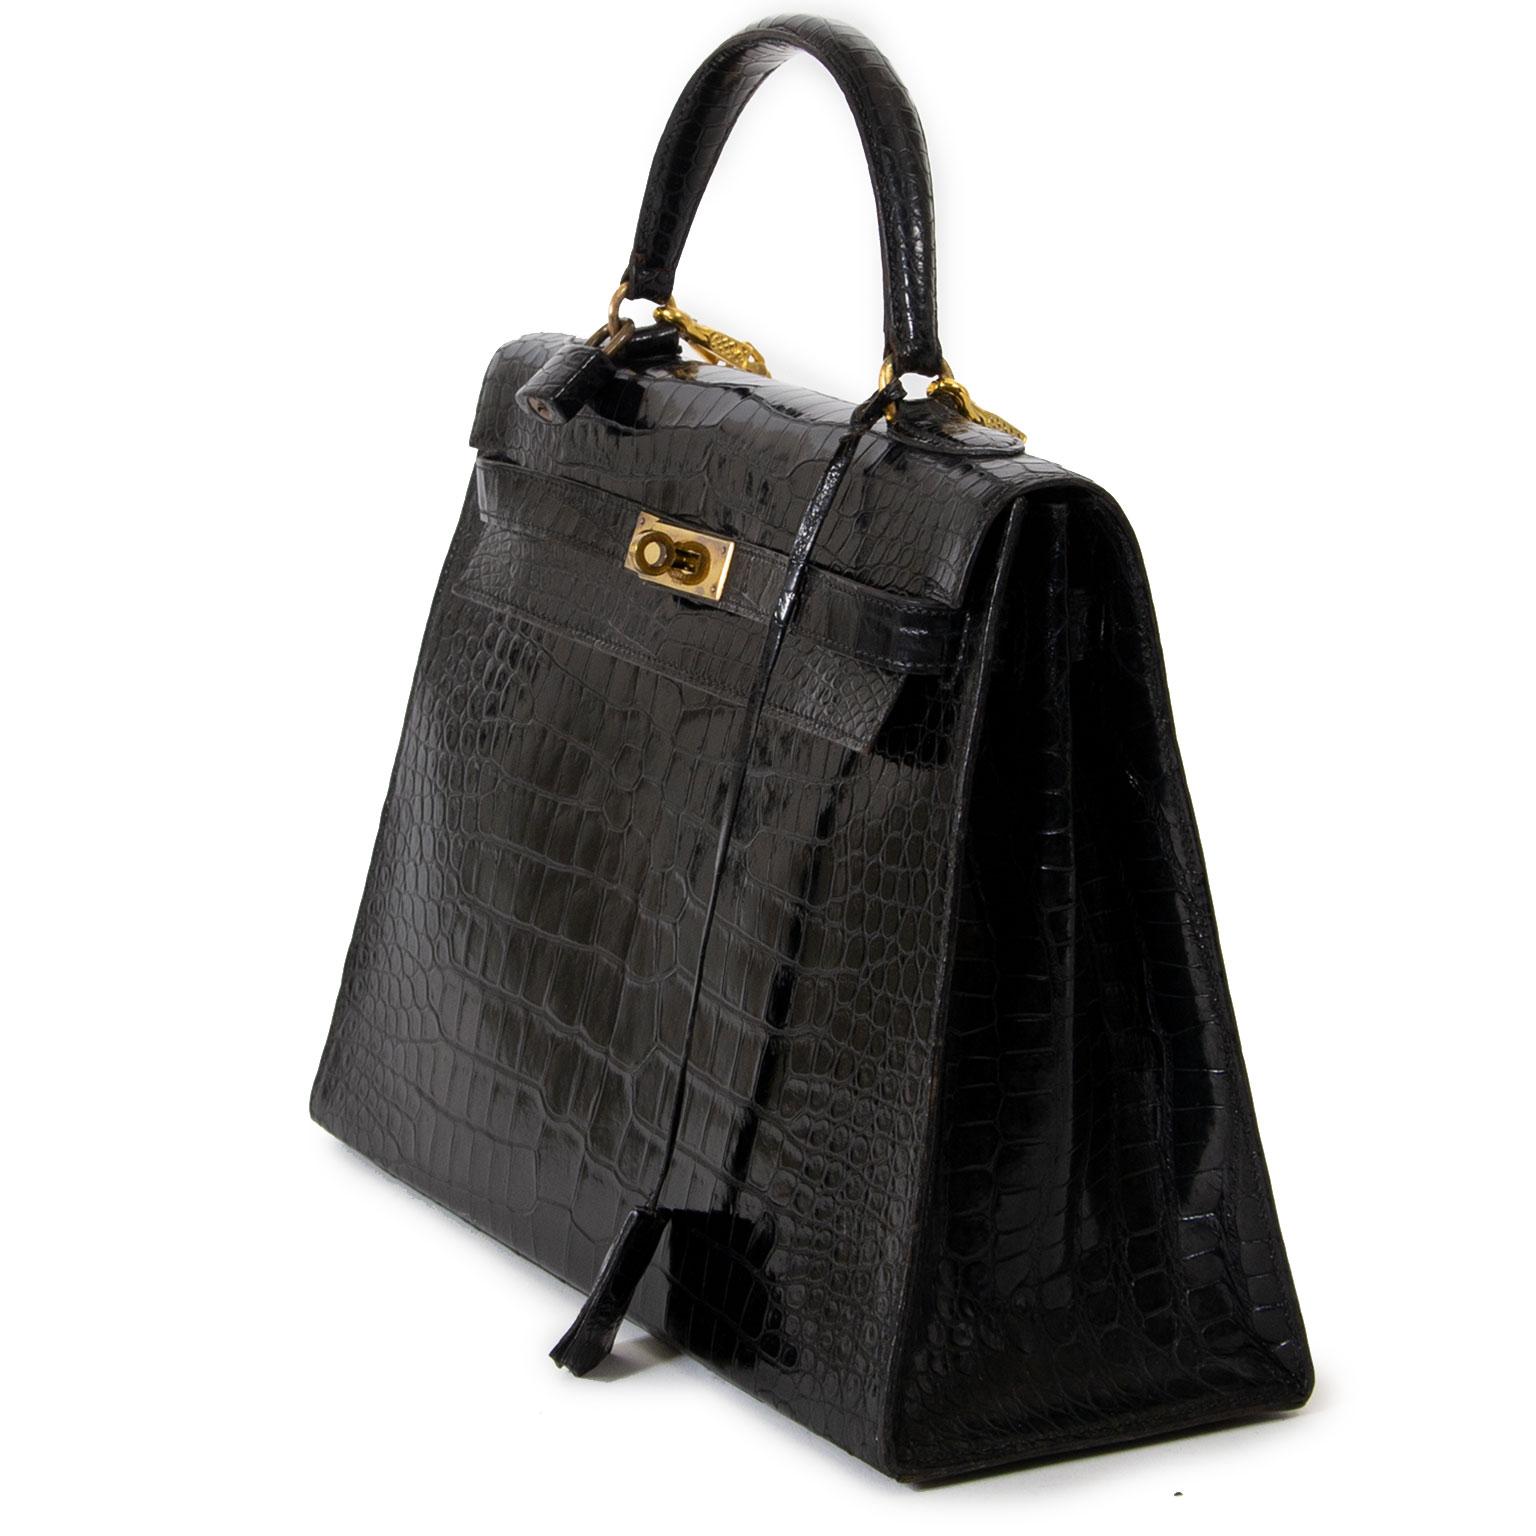  Hermes Kelly 32 Black Crocodile GHW + Strap  In Good Condition For Sale In Antwerp, BE